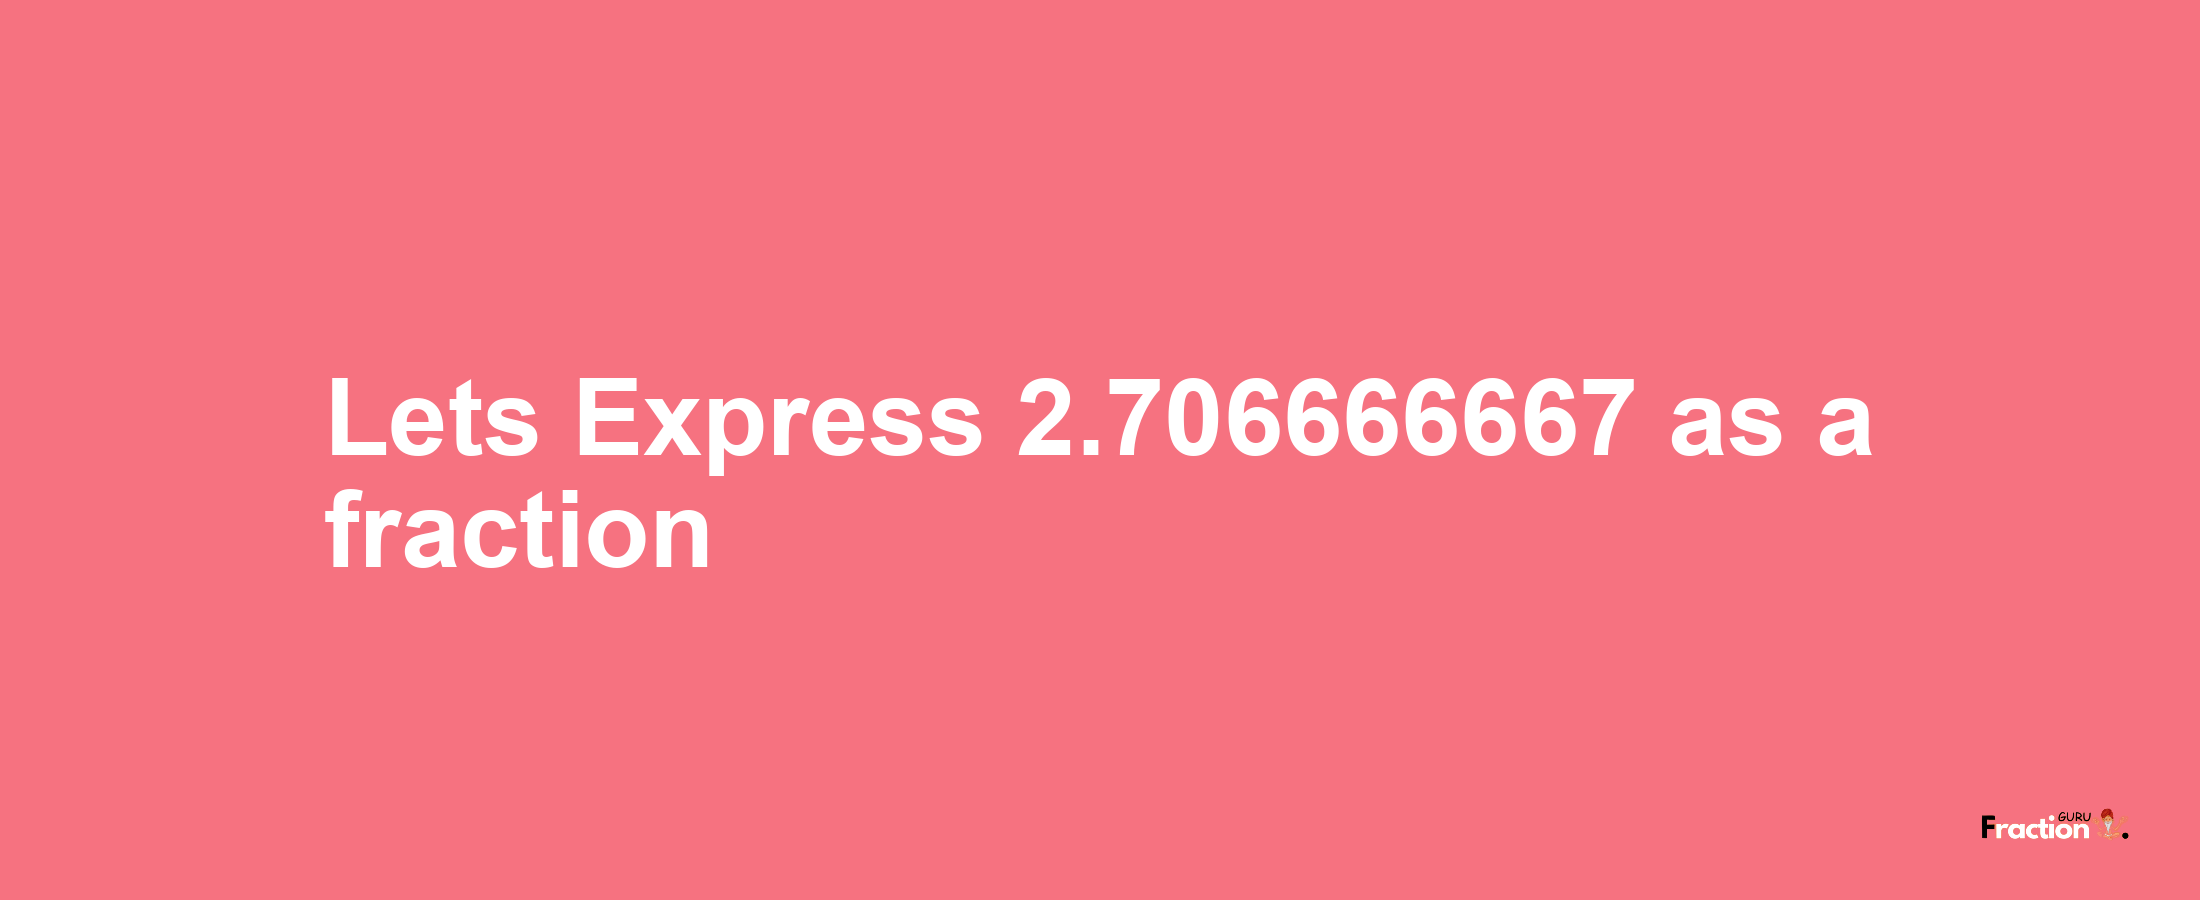 Lets Express 2.706666667 as afraction